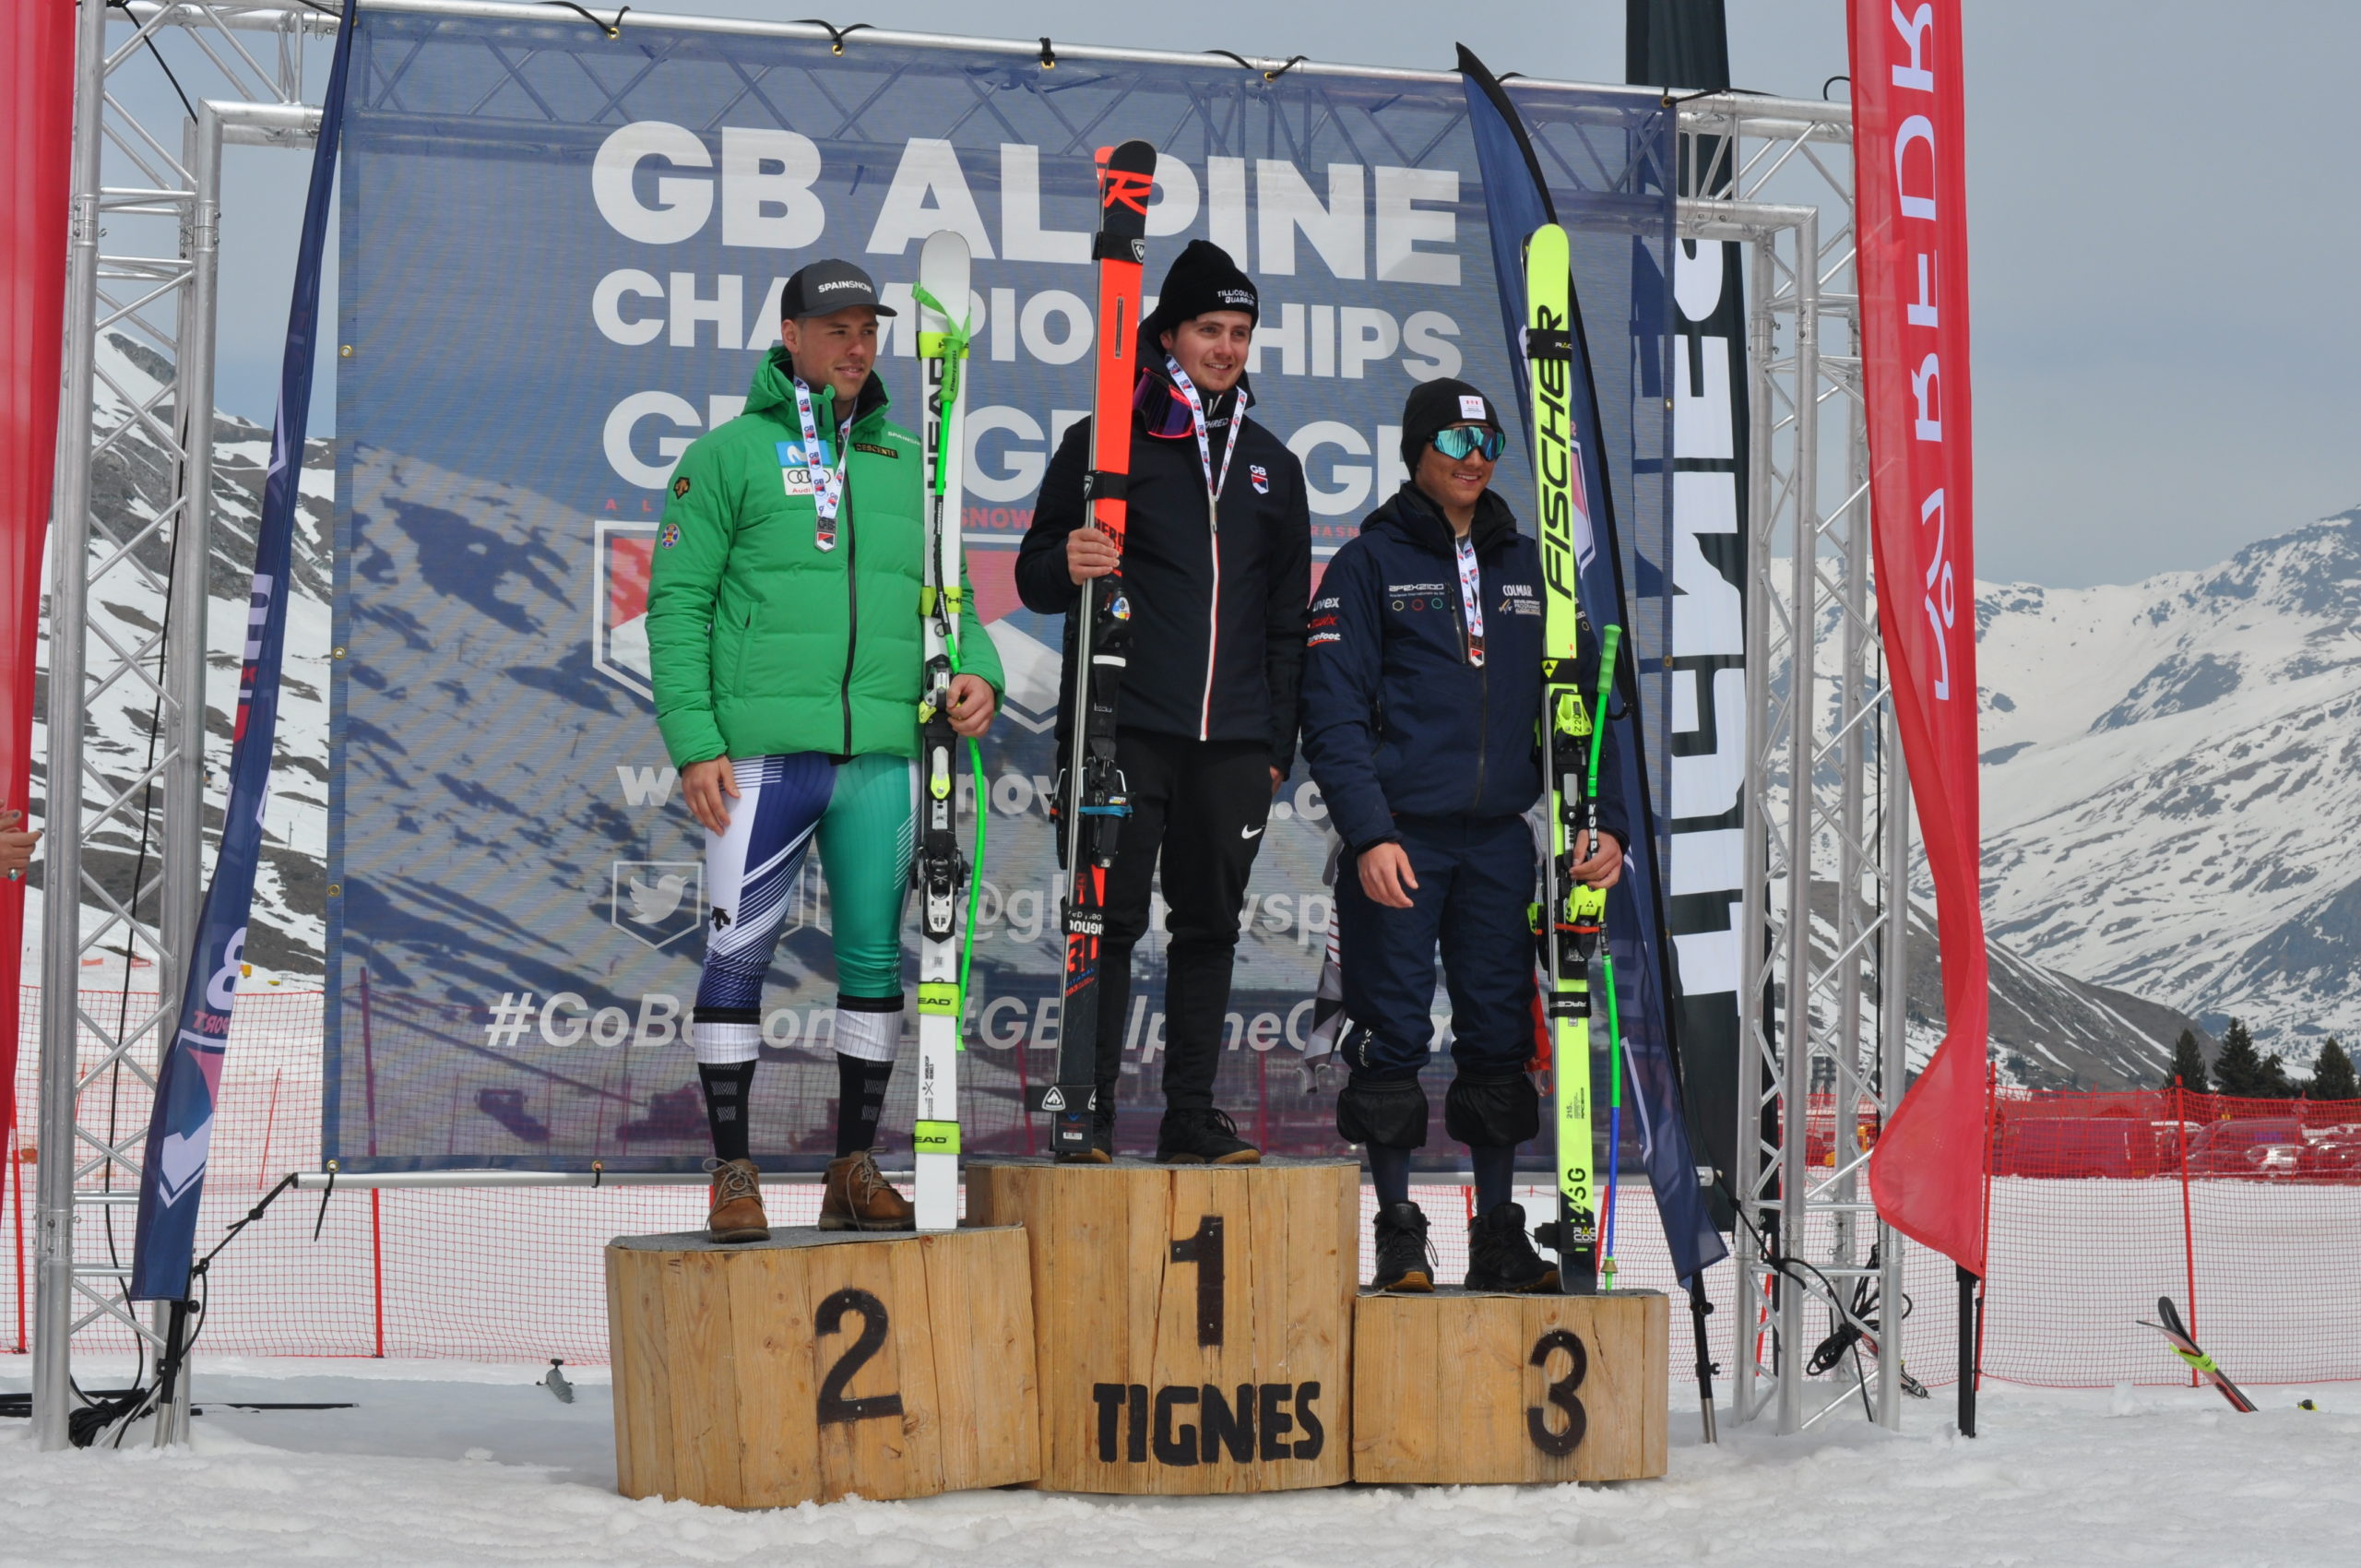 Vinter takes double victory as GB Alpine Championships return